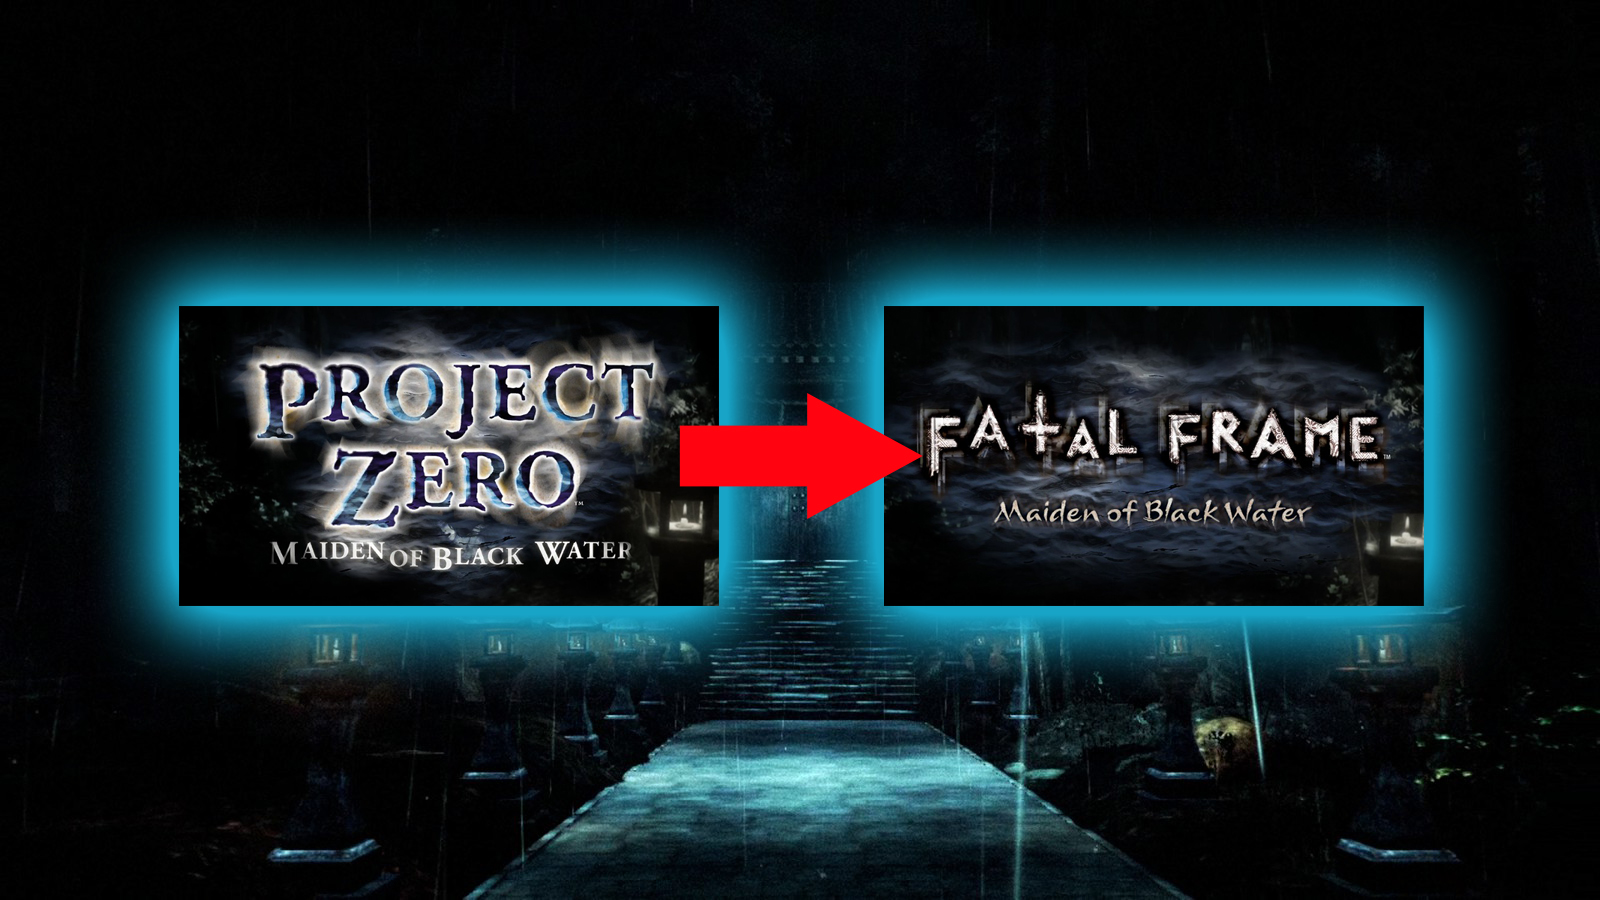 How To Change the Title Card from Project Zero to Fatal Frame (and vice versa) image 1